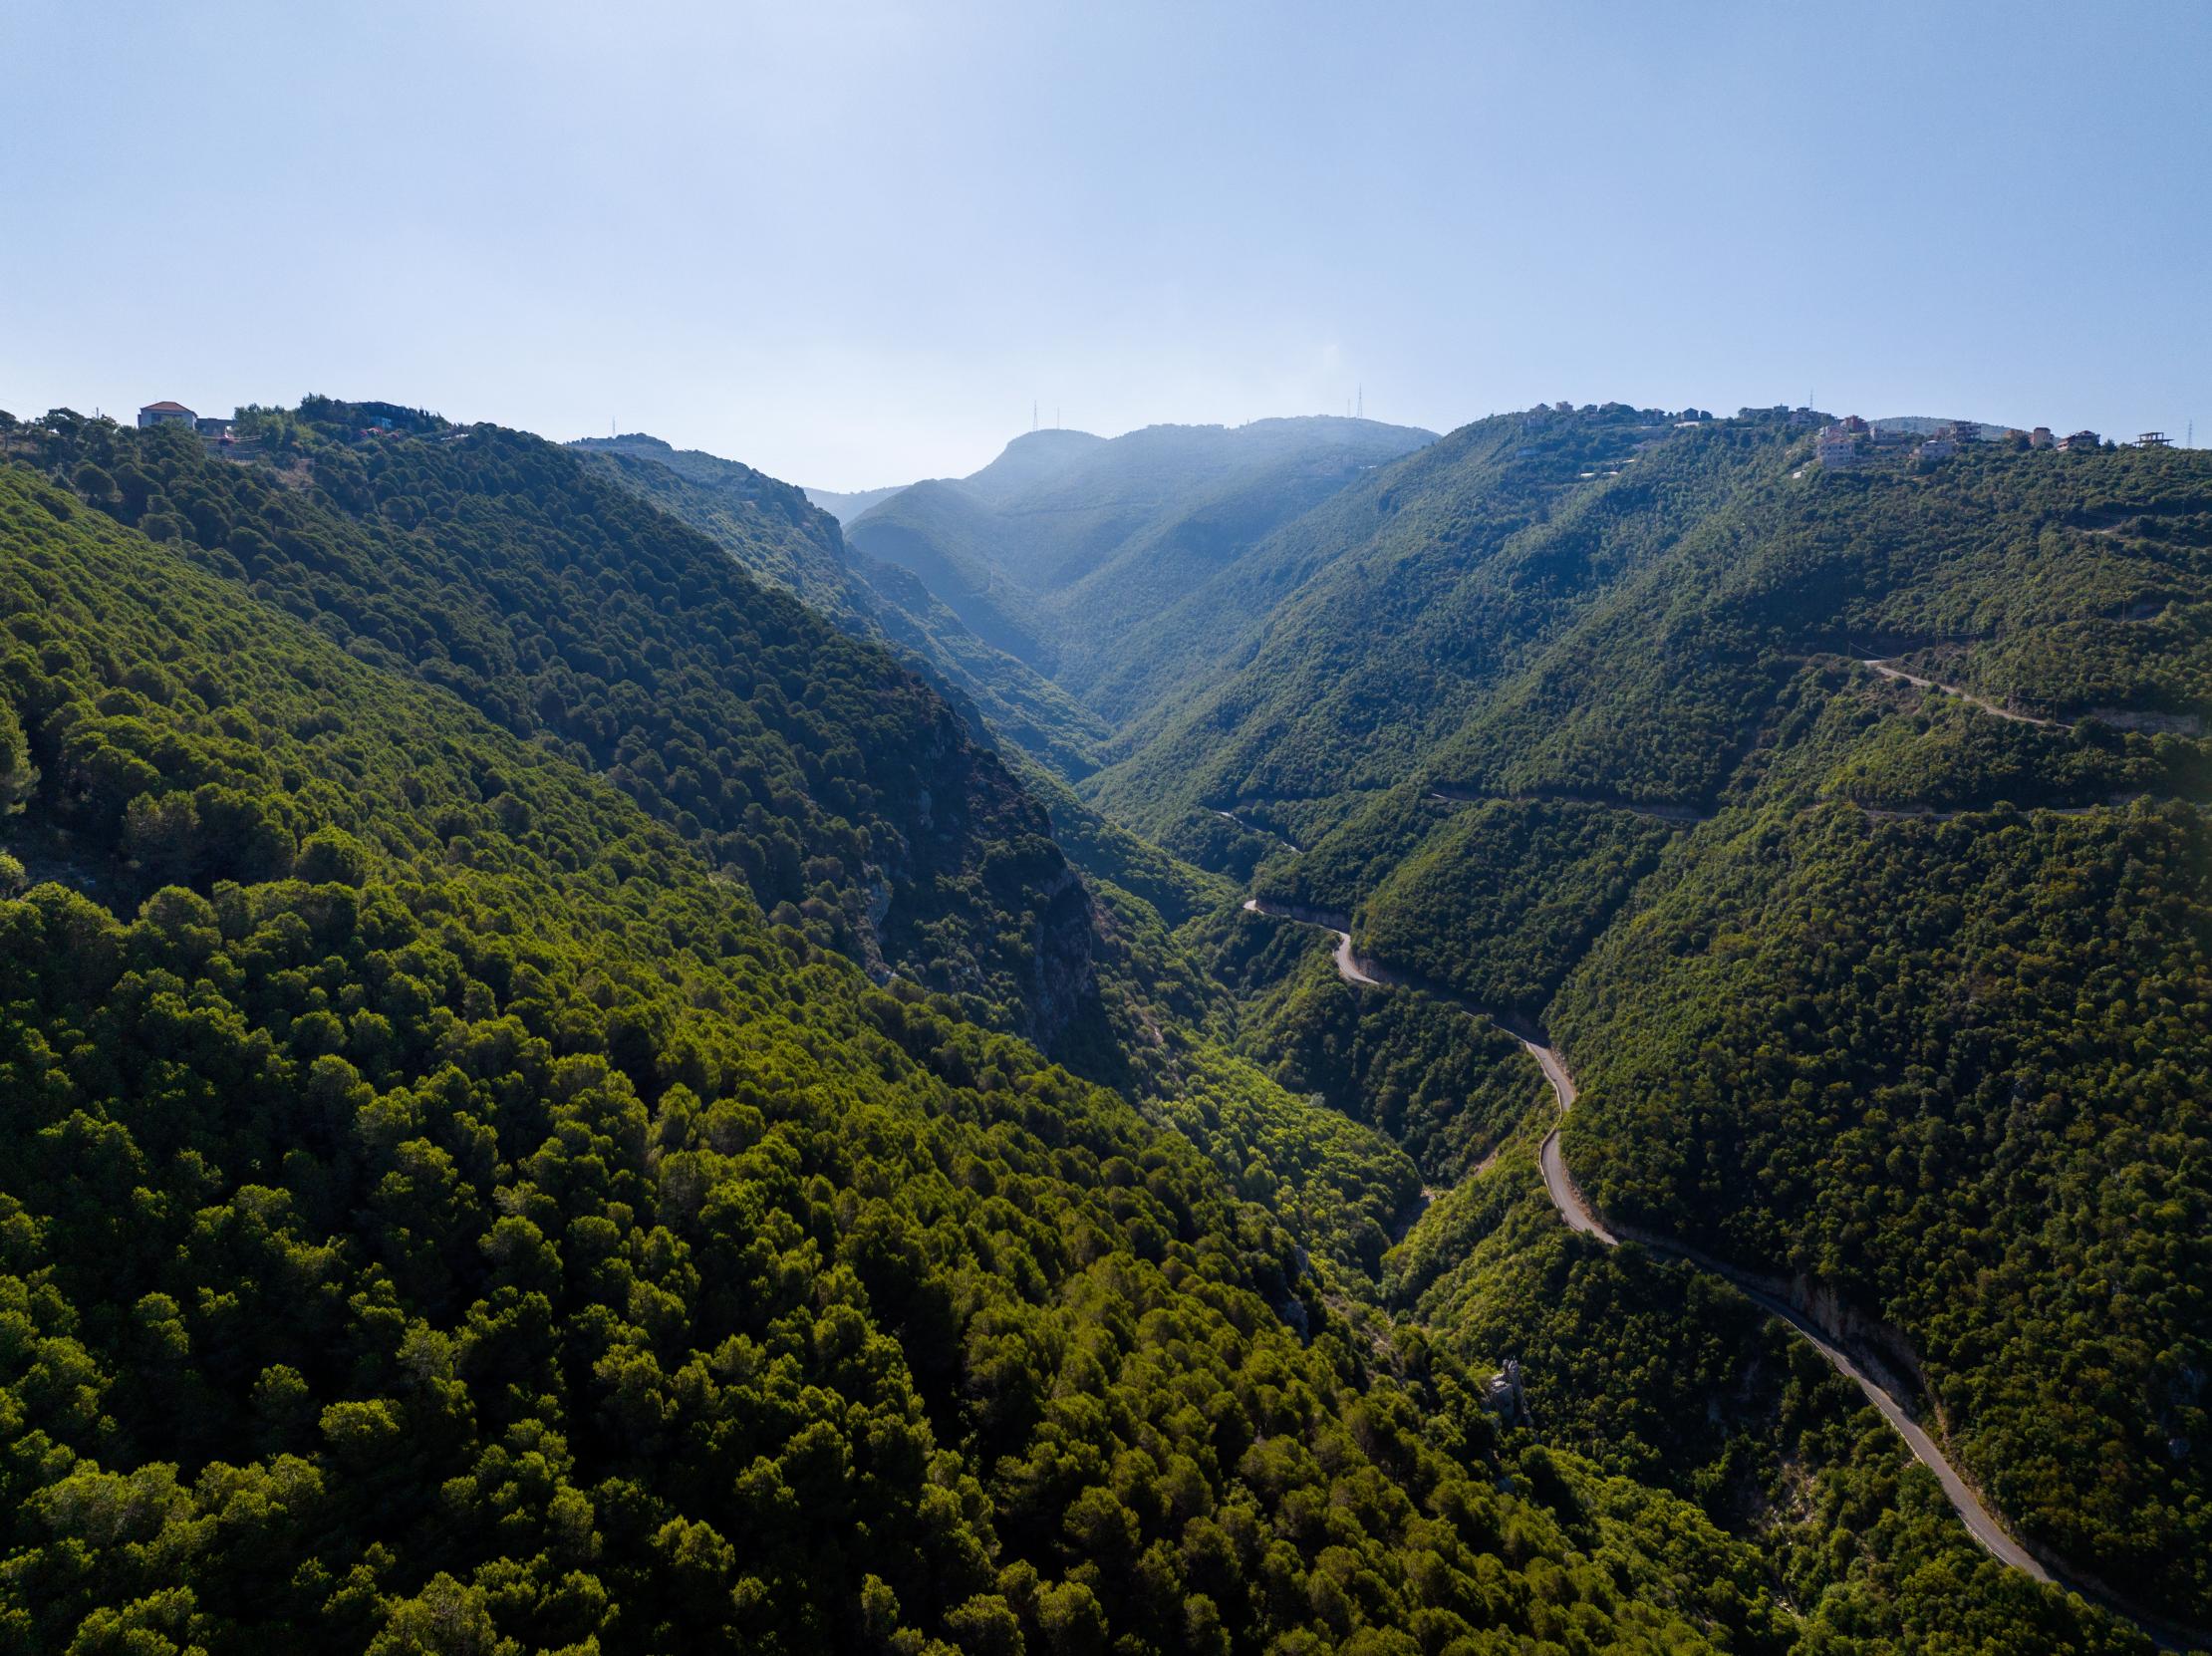 Forests in Lebanon